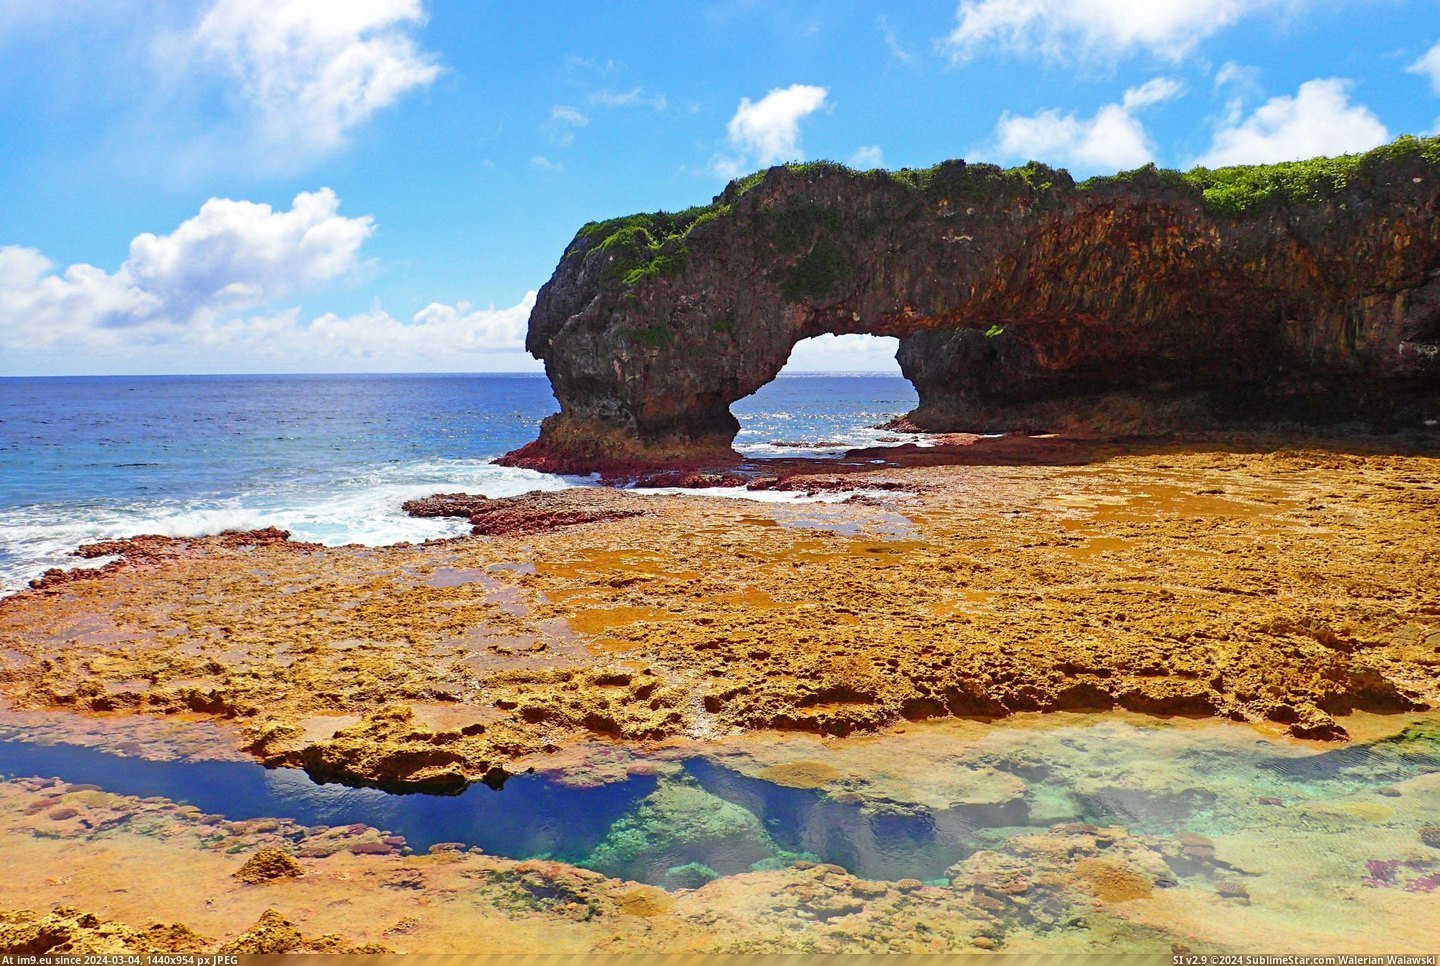 #Tiny #Island #Rock #Coastline #Formations #Country #Arches #Coral [Earthporn] Coral channels and rock formations make up the coastline of this tiny island country | Talava Arches, Niue  [4608x30 Pic. (Изображение из альбом My r/EARTHPORN favs))